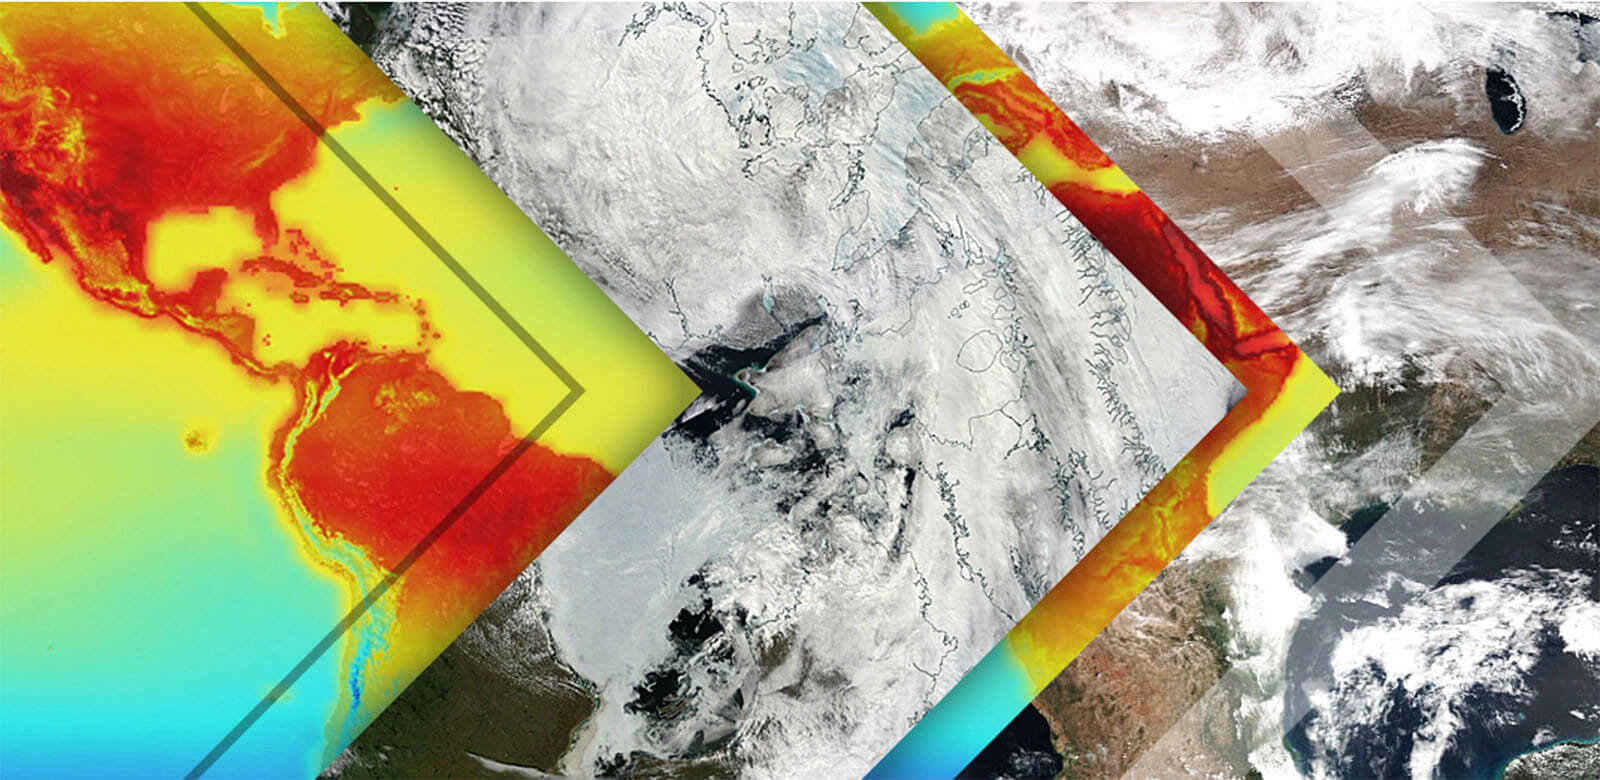 Weather images layered on top of each other